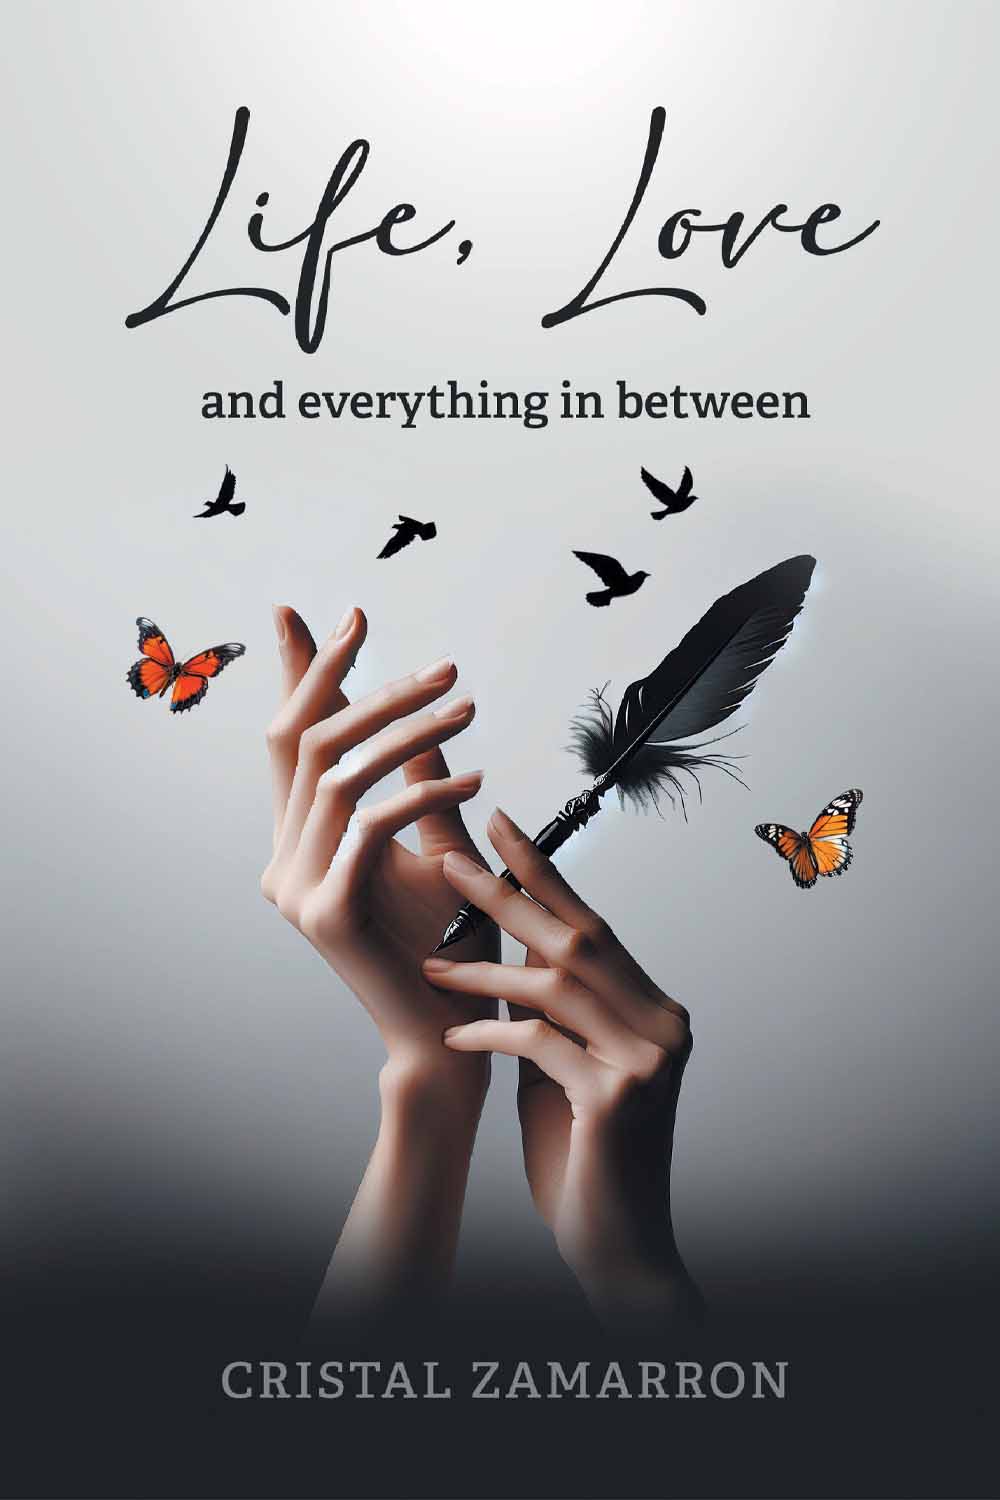 Life, Love and everything in between by Cristal Zamarron